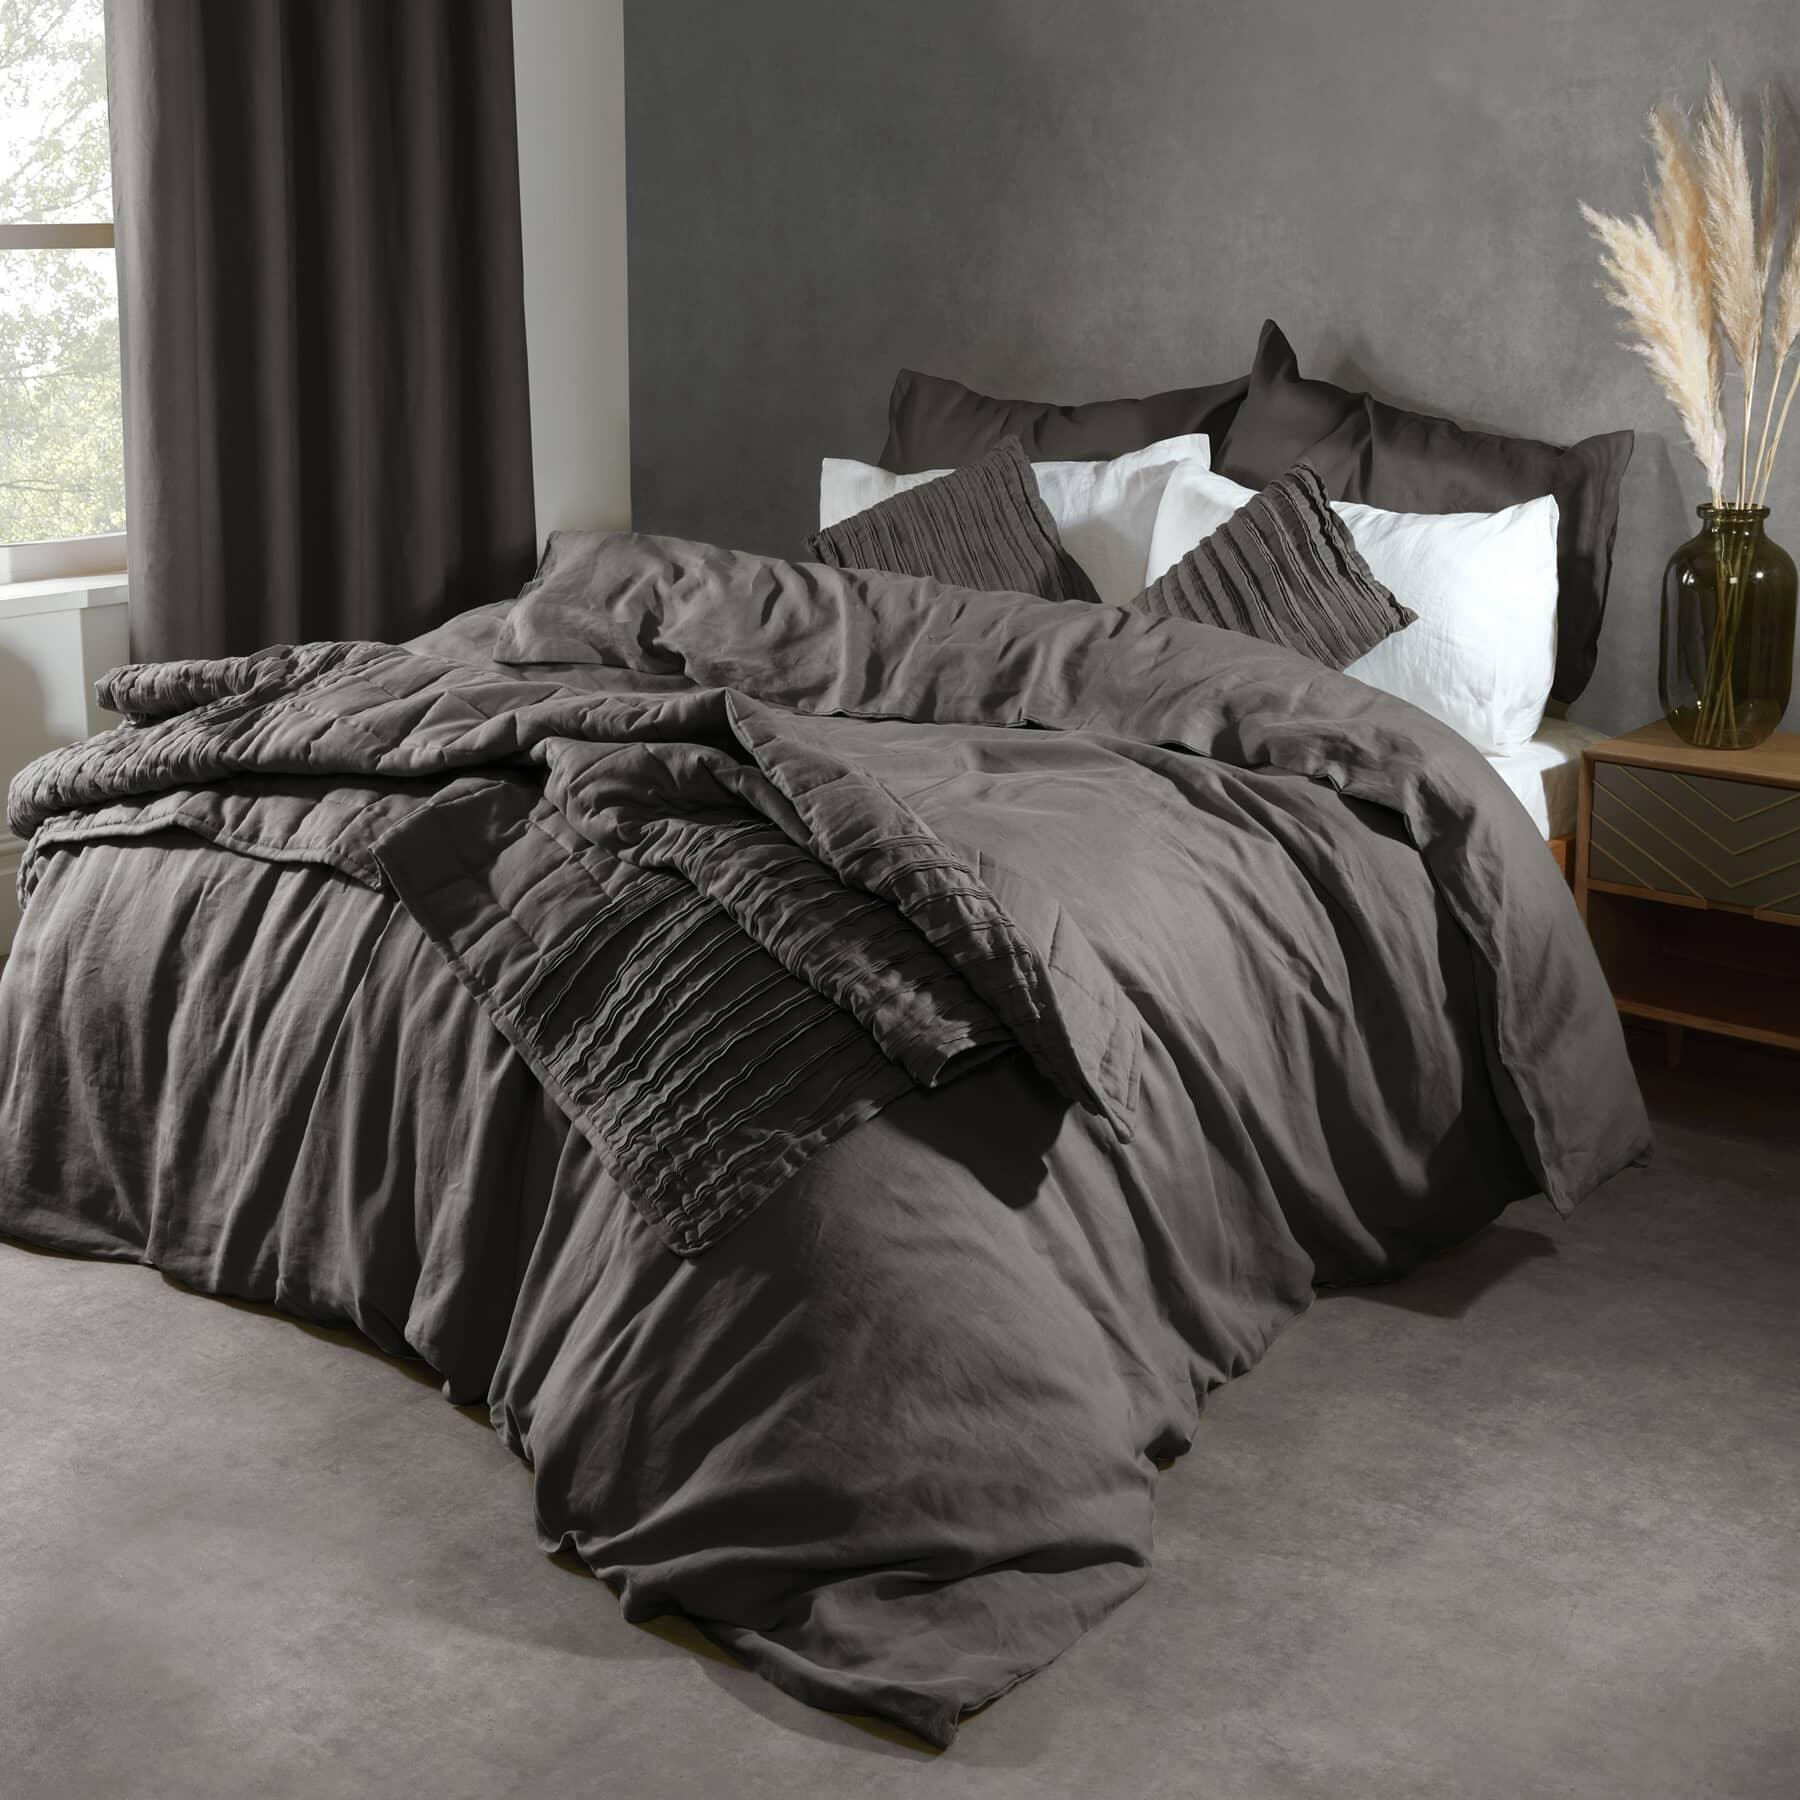 Duvet Cover Charcoal - RUTHERFORD & Co